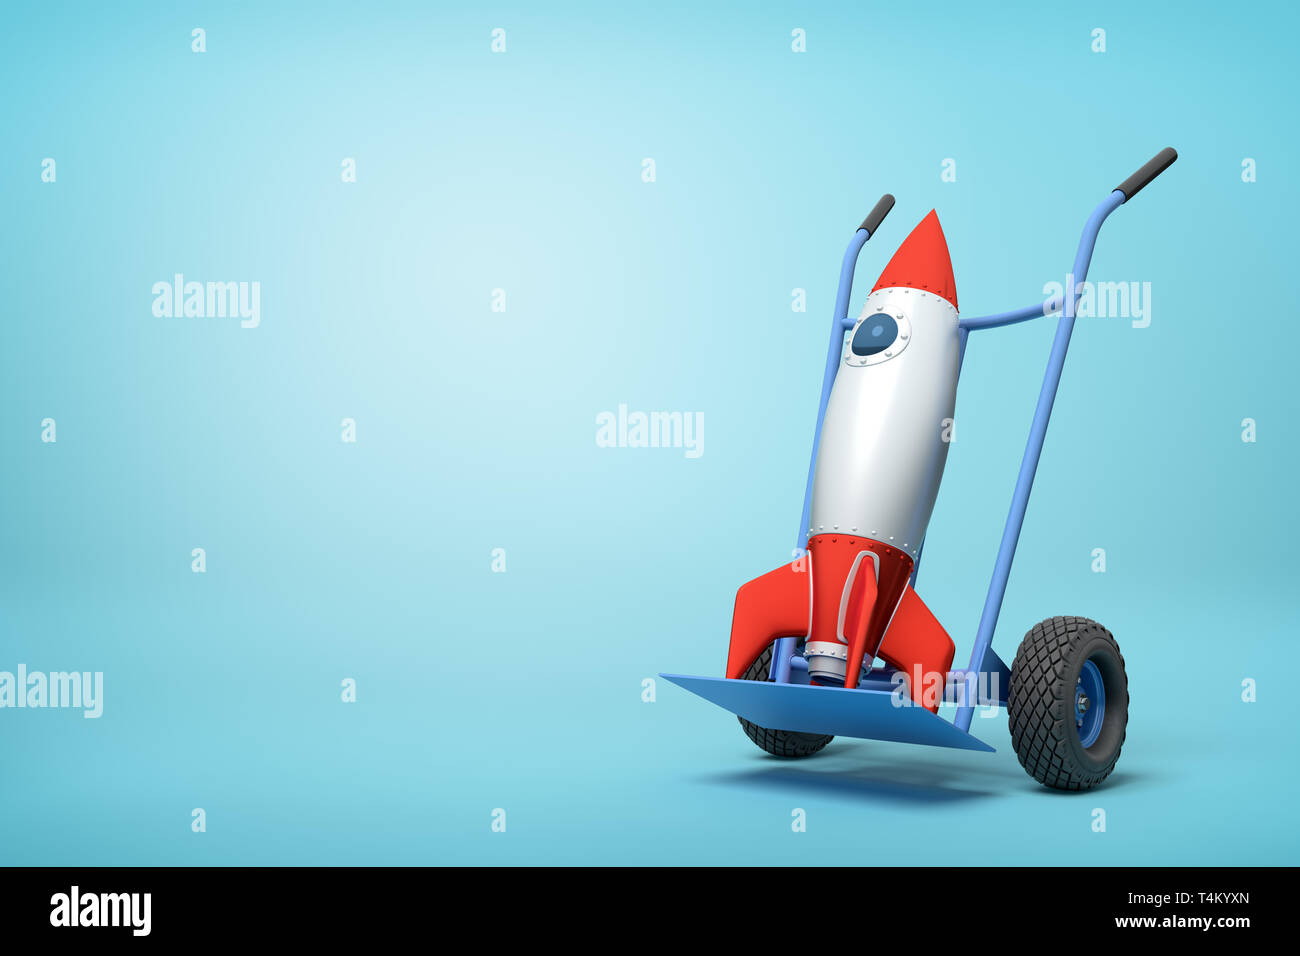 3d rendering of toy space rocket on blue hand truck which is standing in half-turn on light-blue background with copy space. Stock Photo